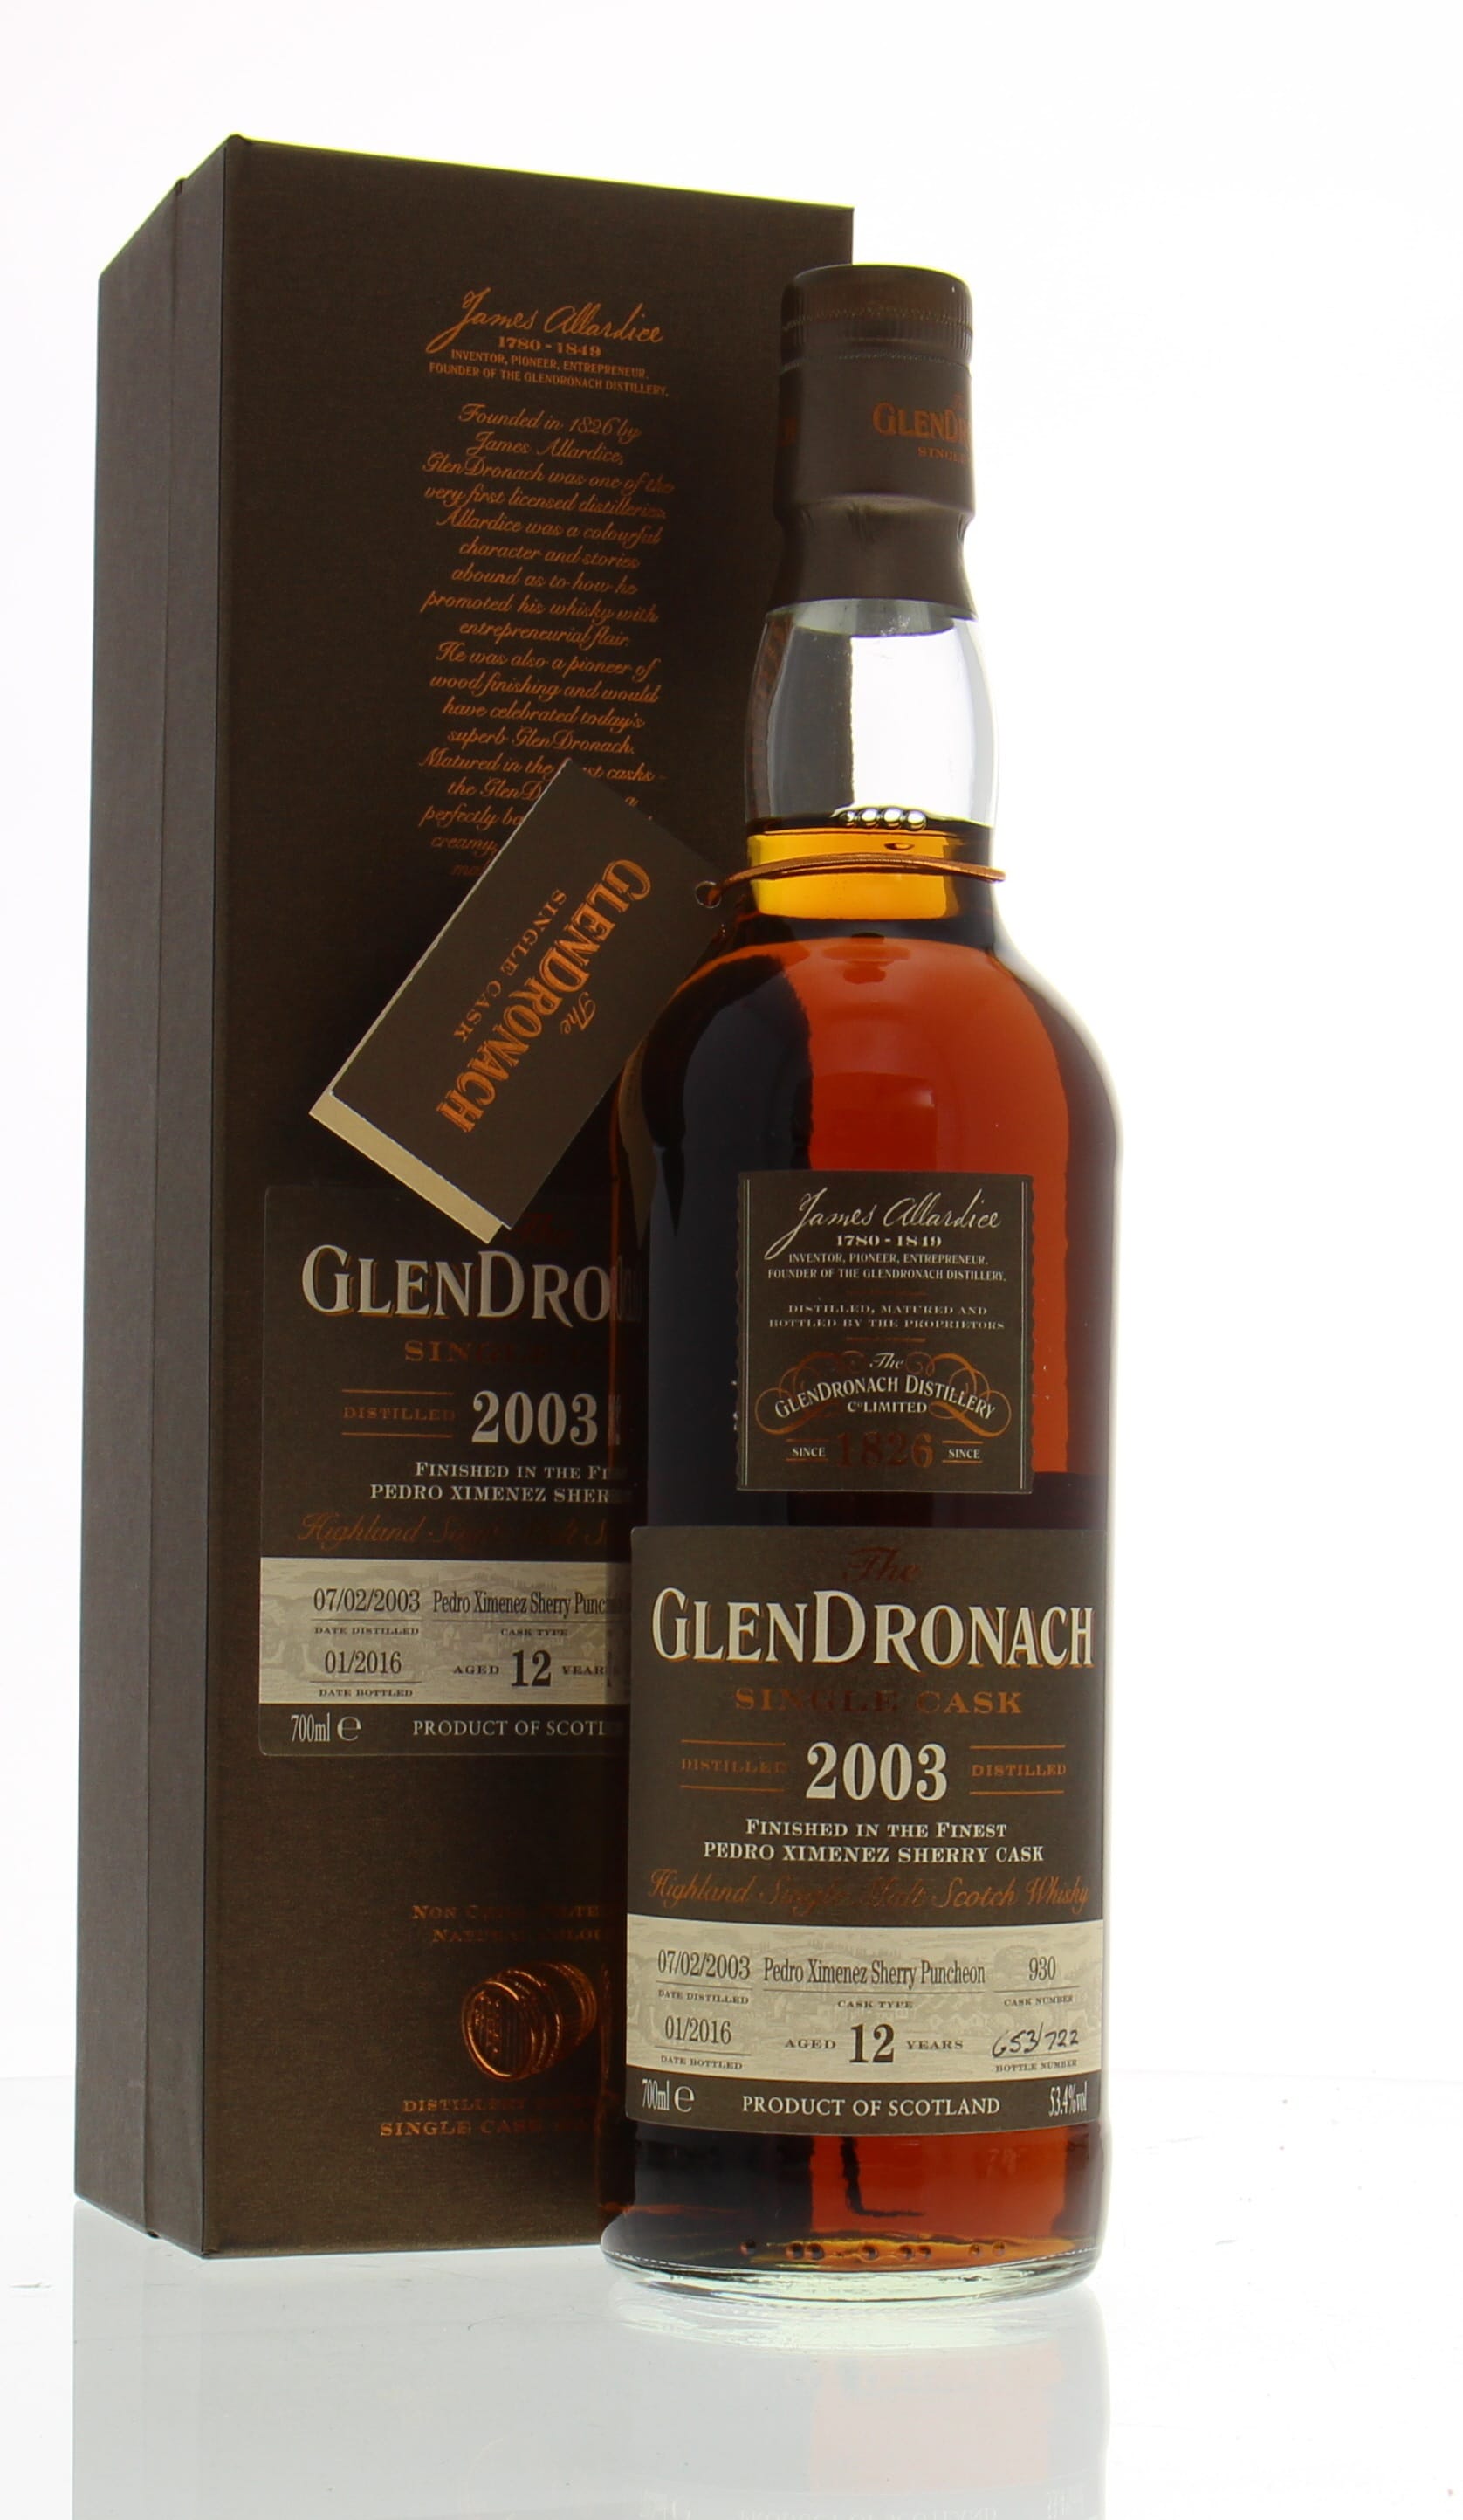 Glendronach - 12 Years Old Batch 13 Cask:930 53.4% 2003 In Original Container